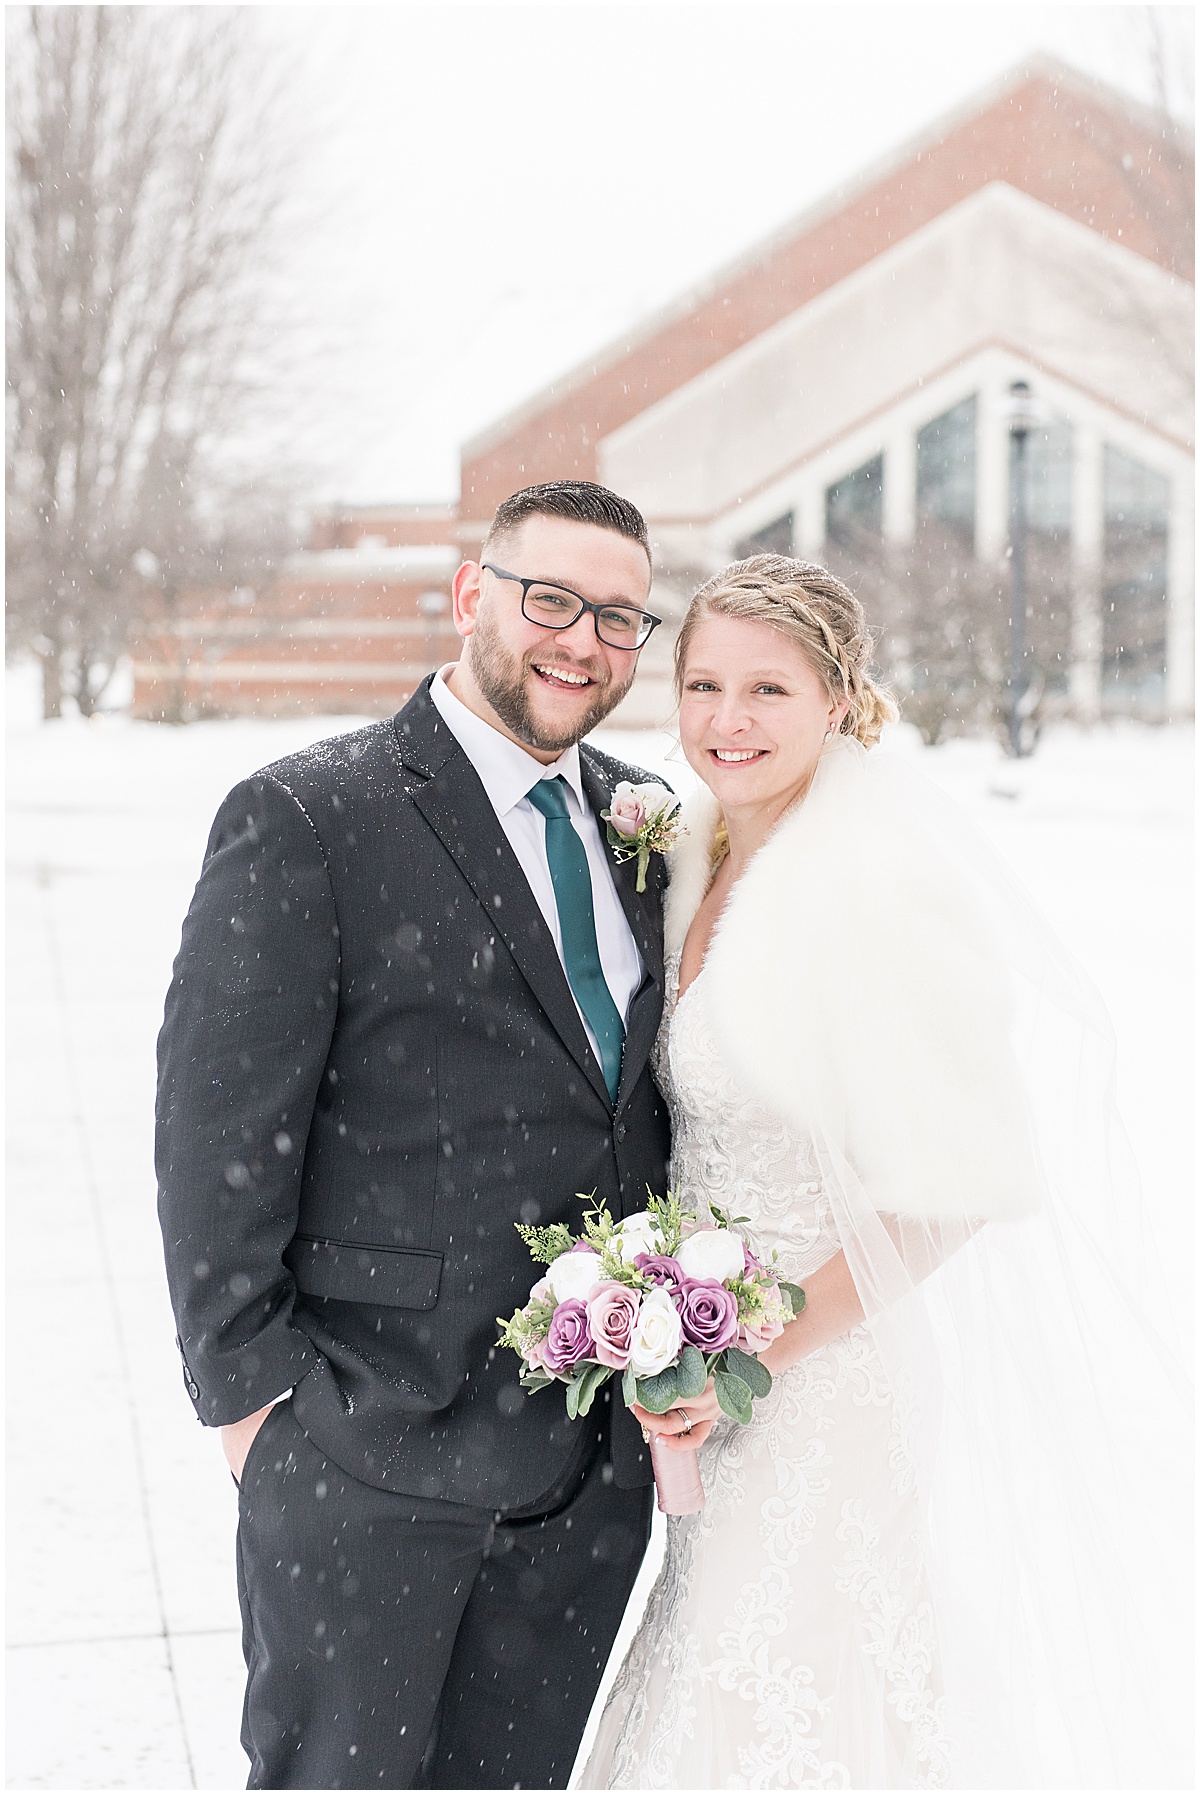 Winter wedding photos at Trinity Christian College in Chicago by Victoria Rayburn Photography